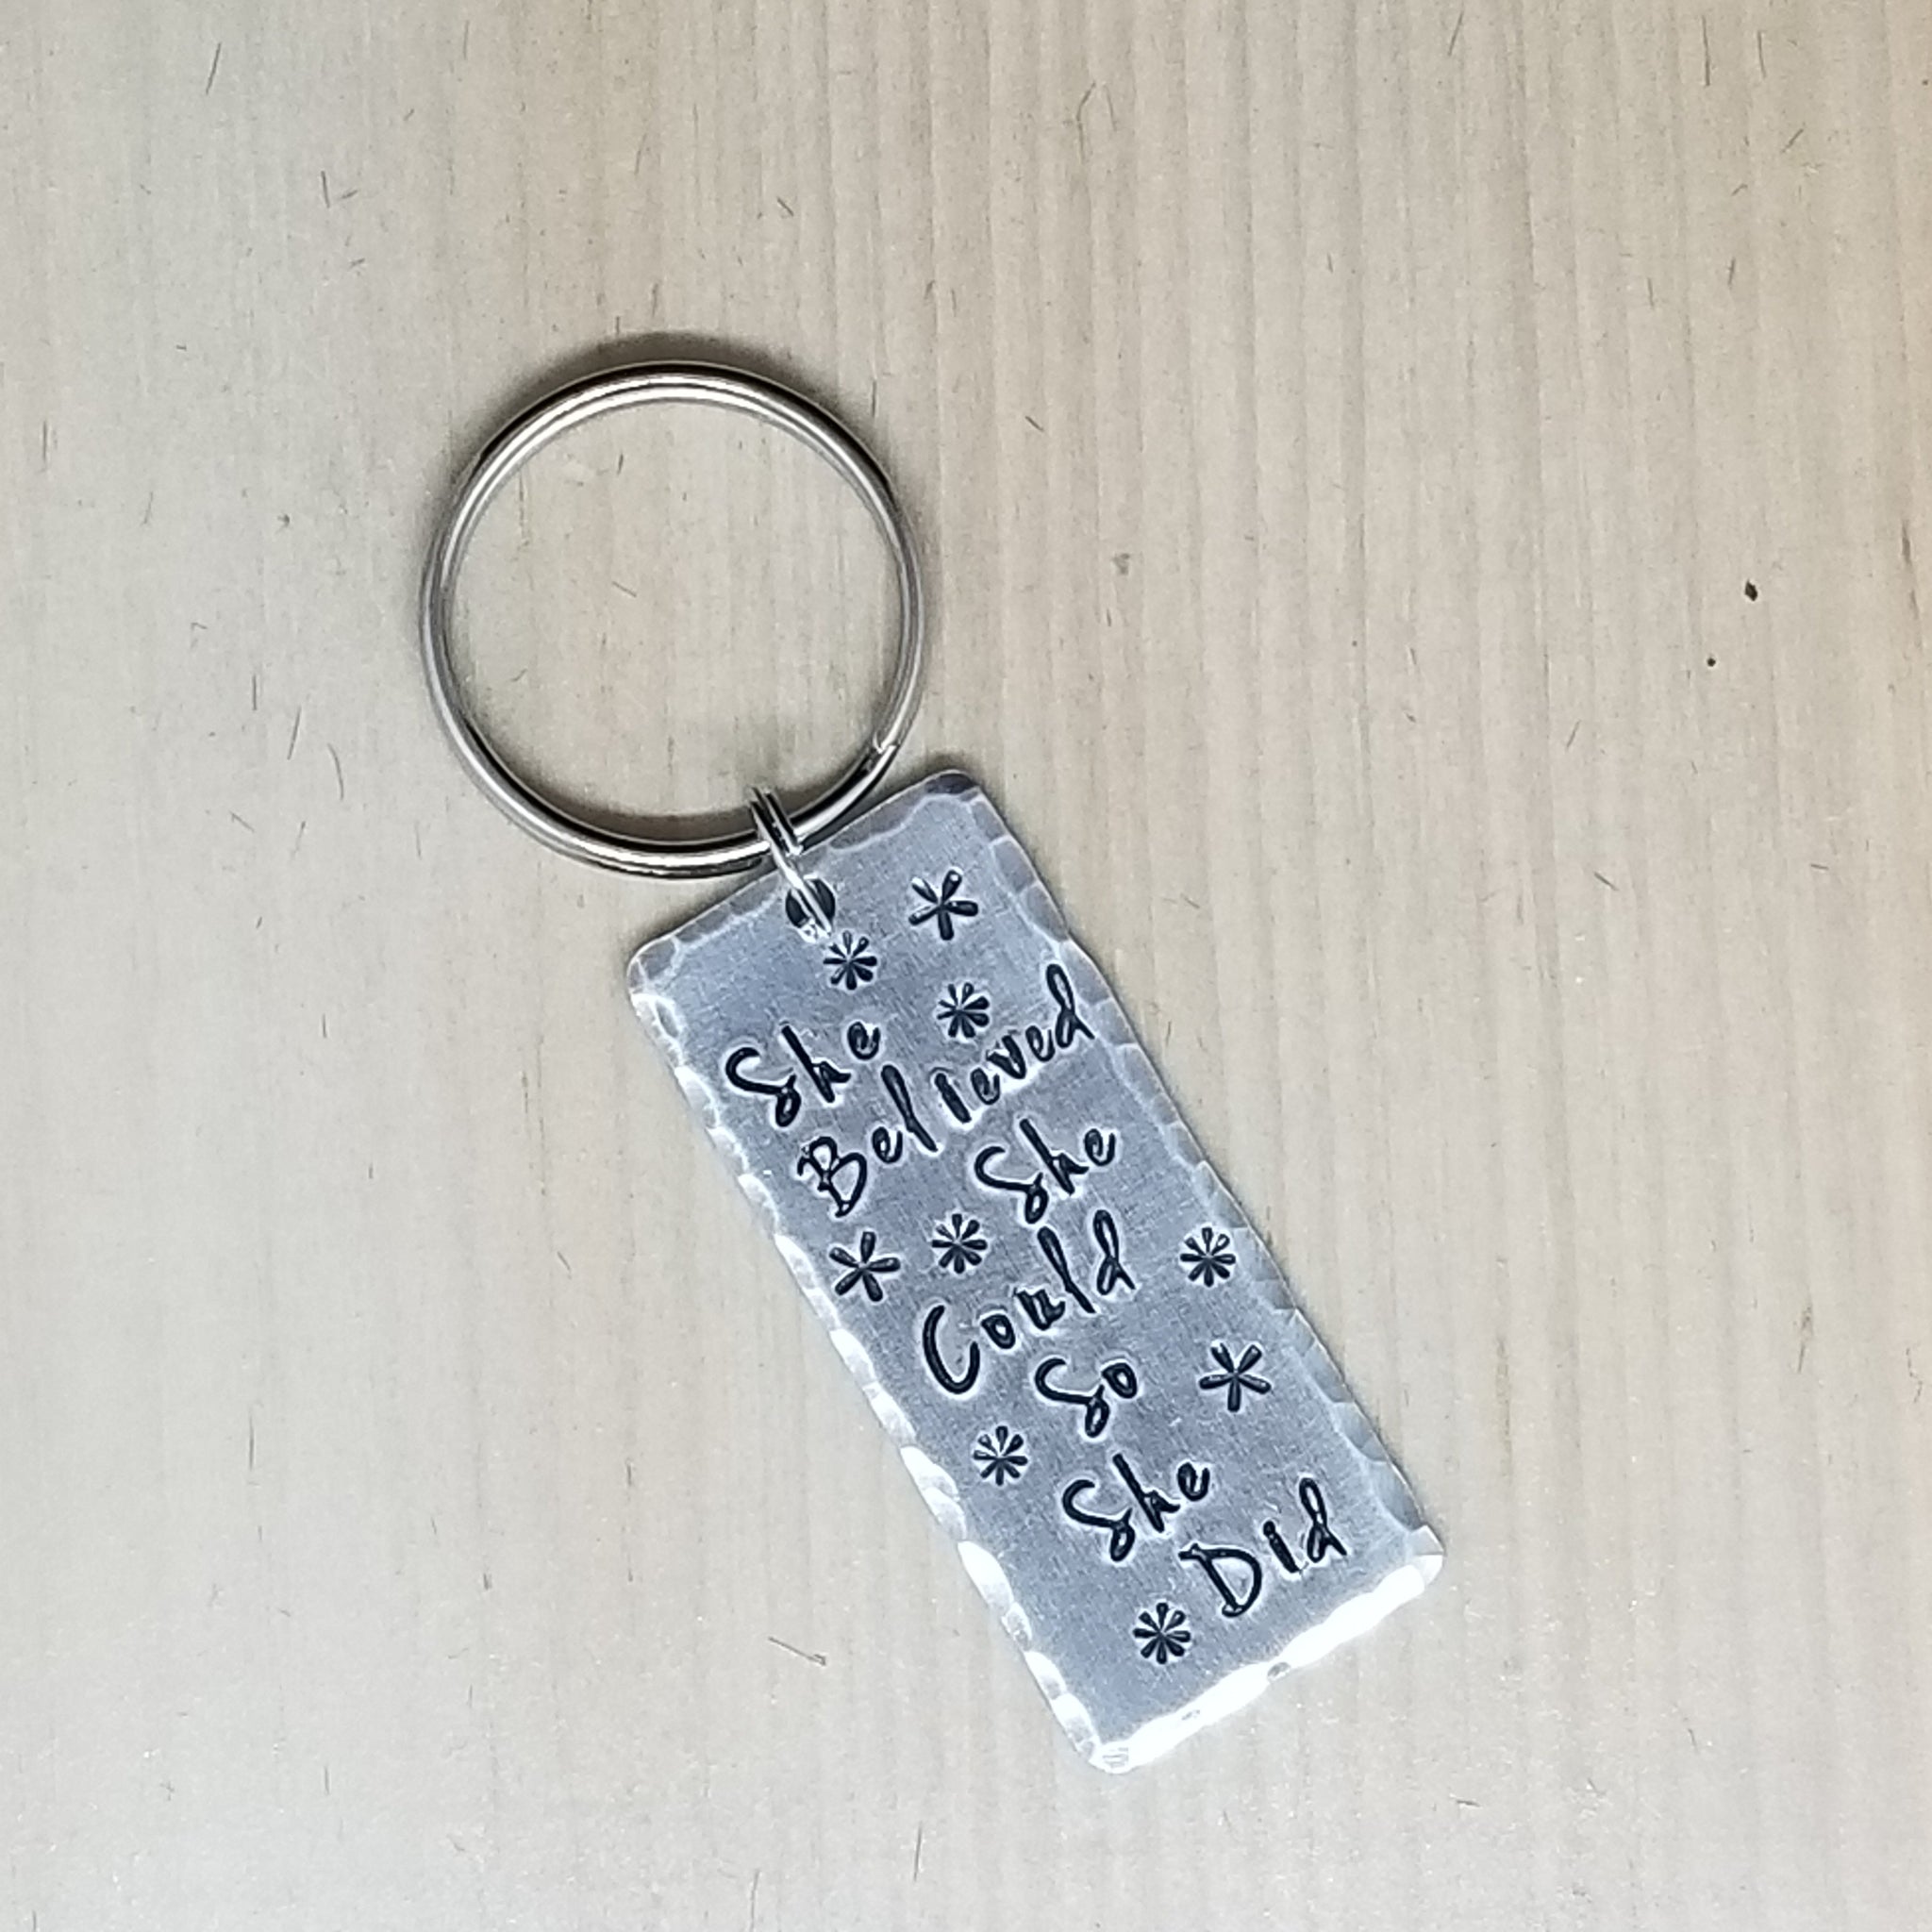 Hand stamped keychains - Custom - 2 pieces of metal – Sparkle! Designs